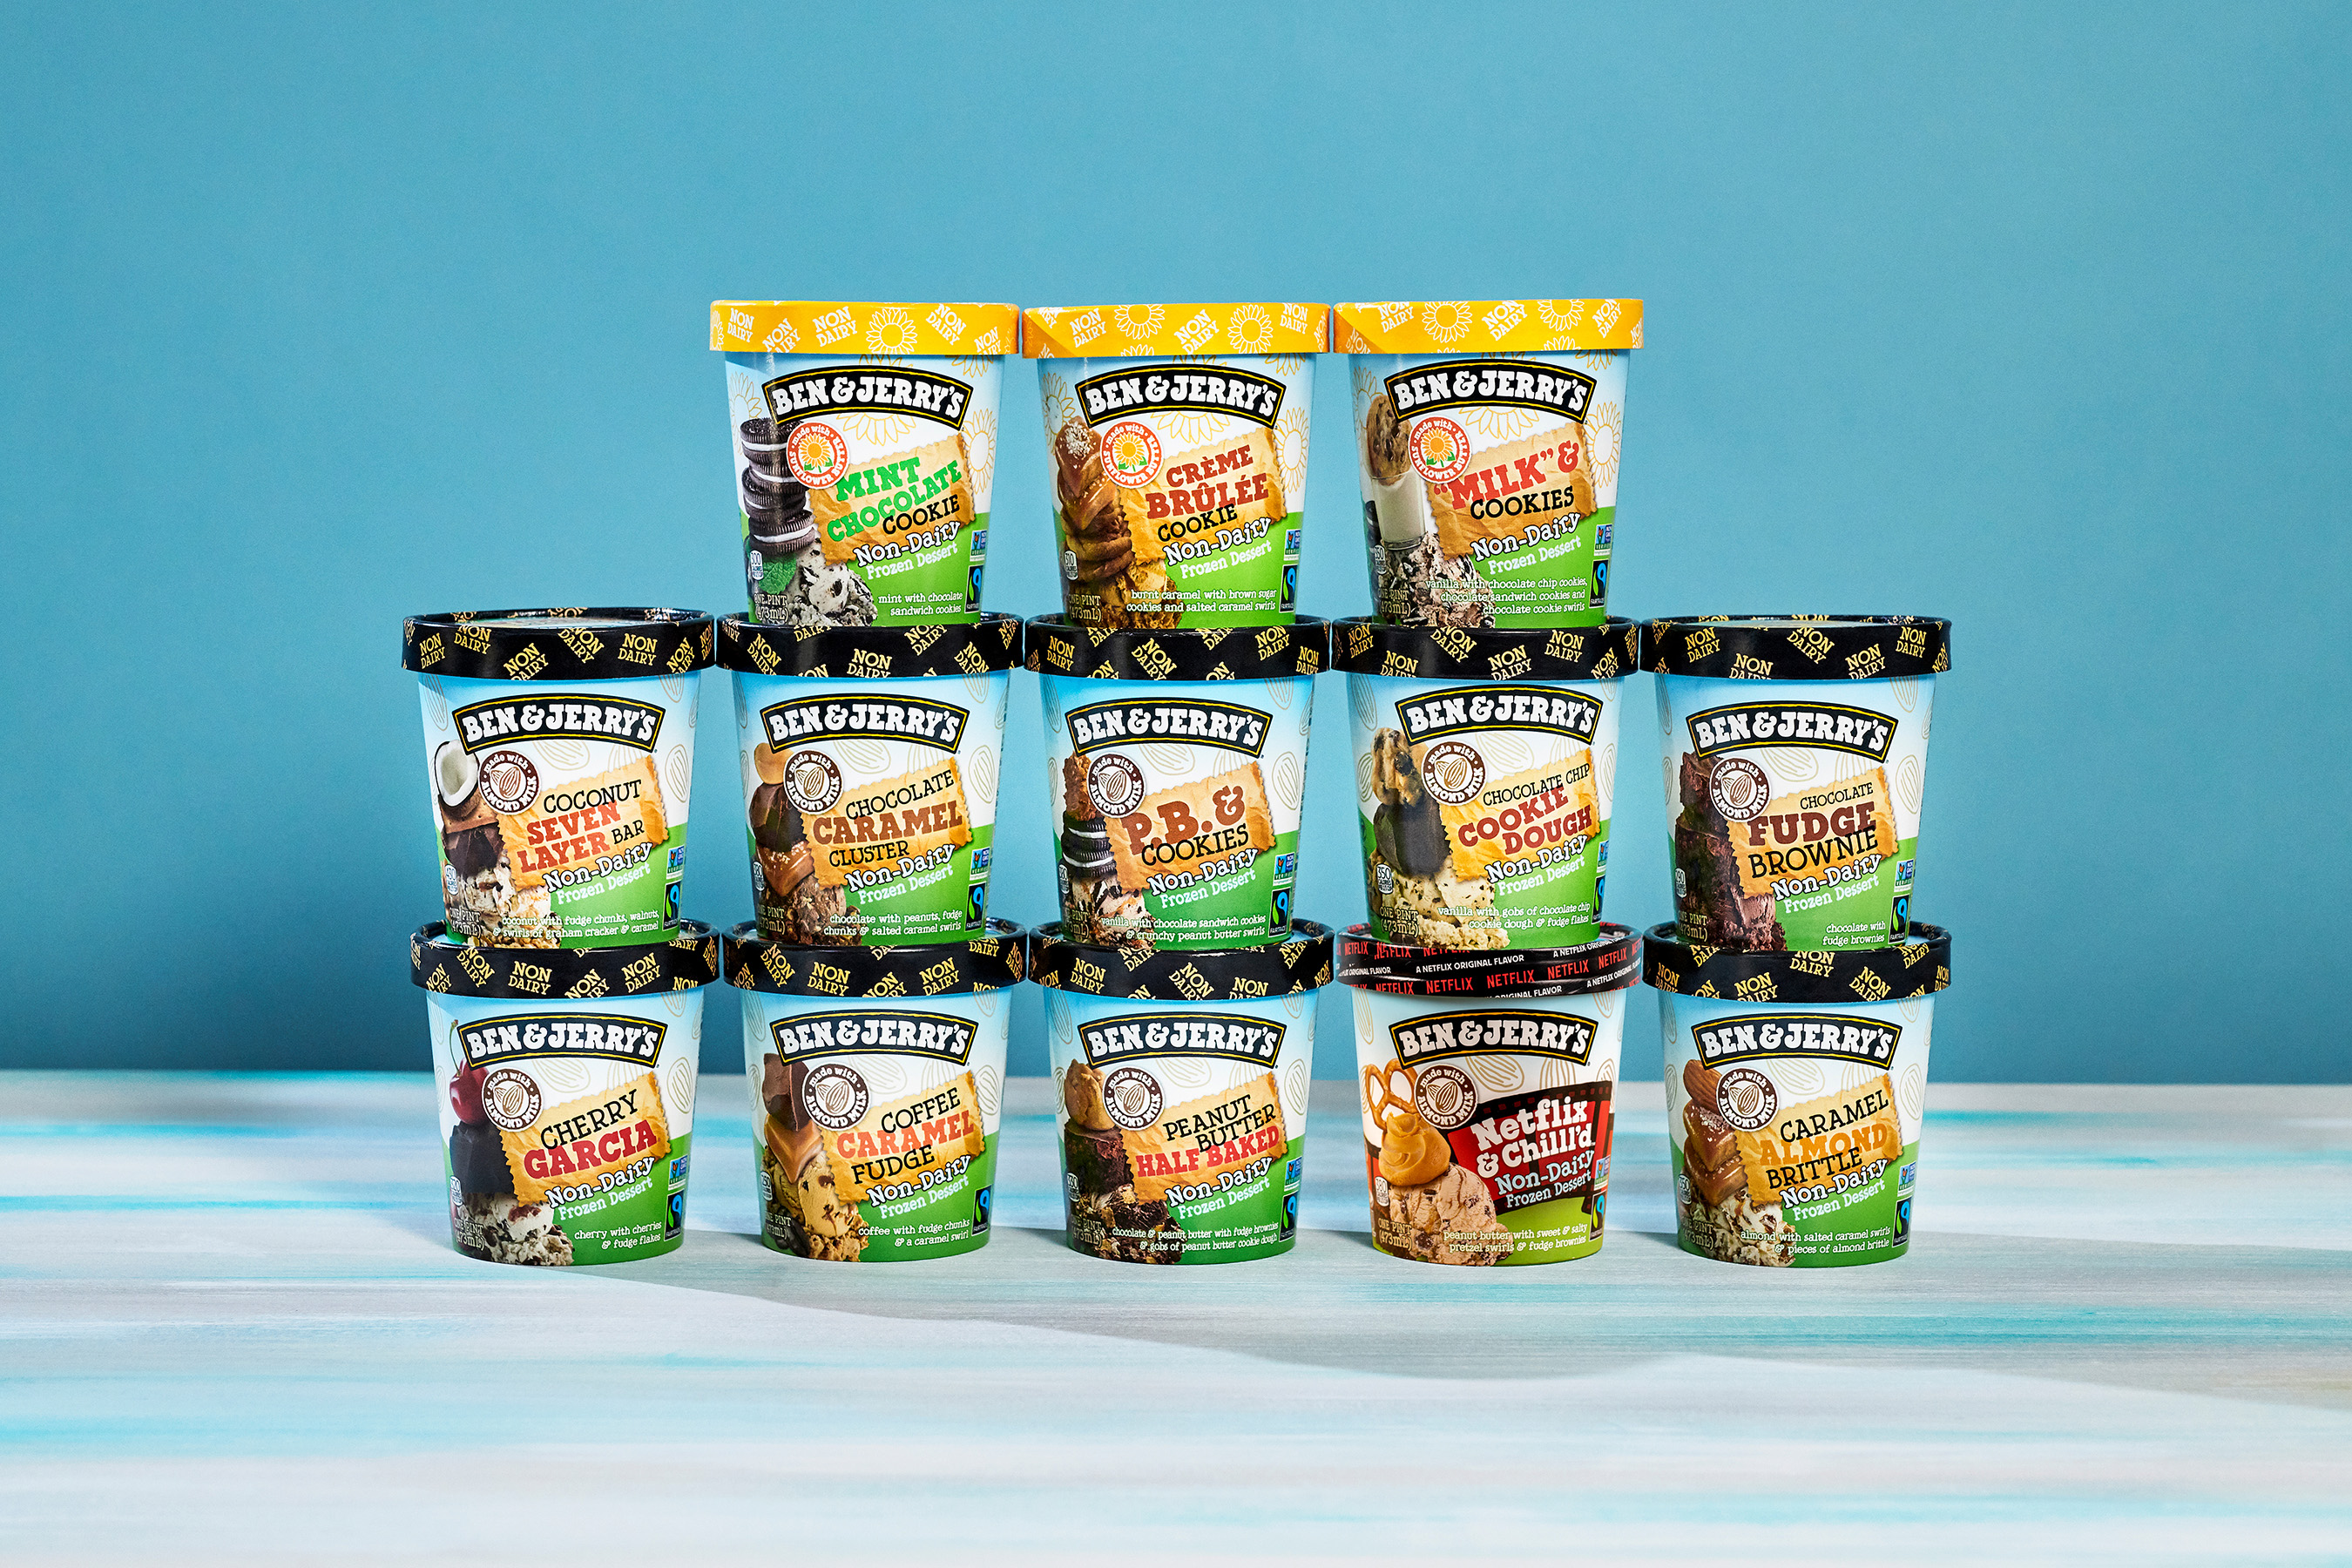 Ben & Jerry’s pint powerhouse Non-Dairy flavor line up including three new seed-based sunflower butter flavors.